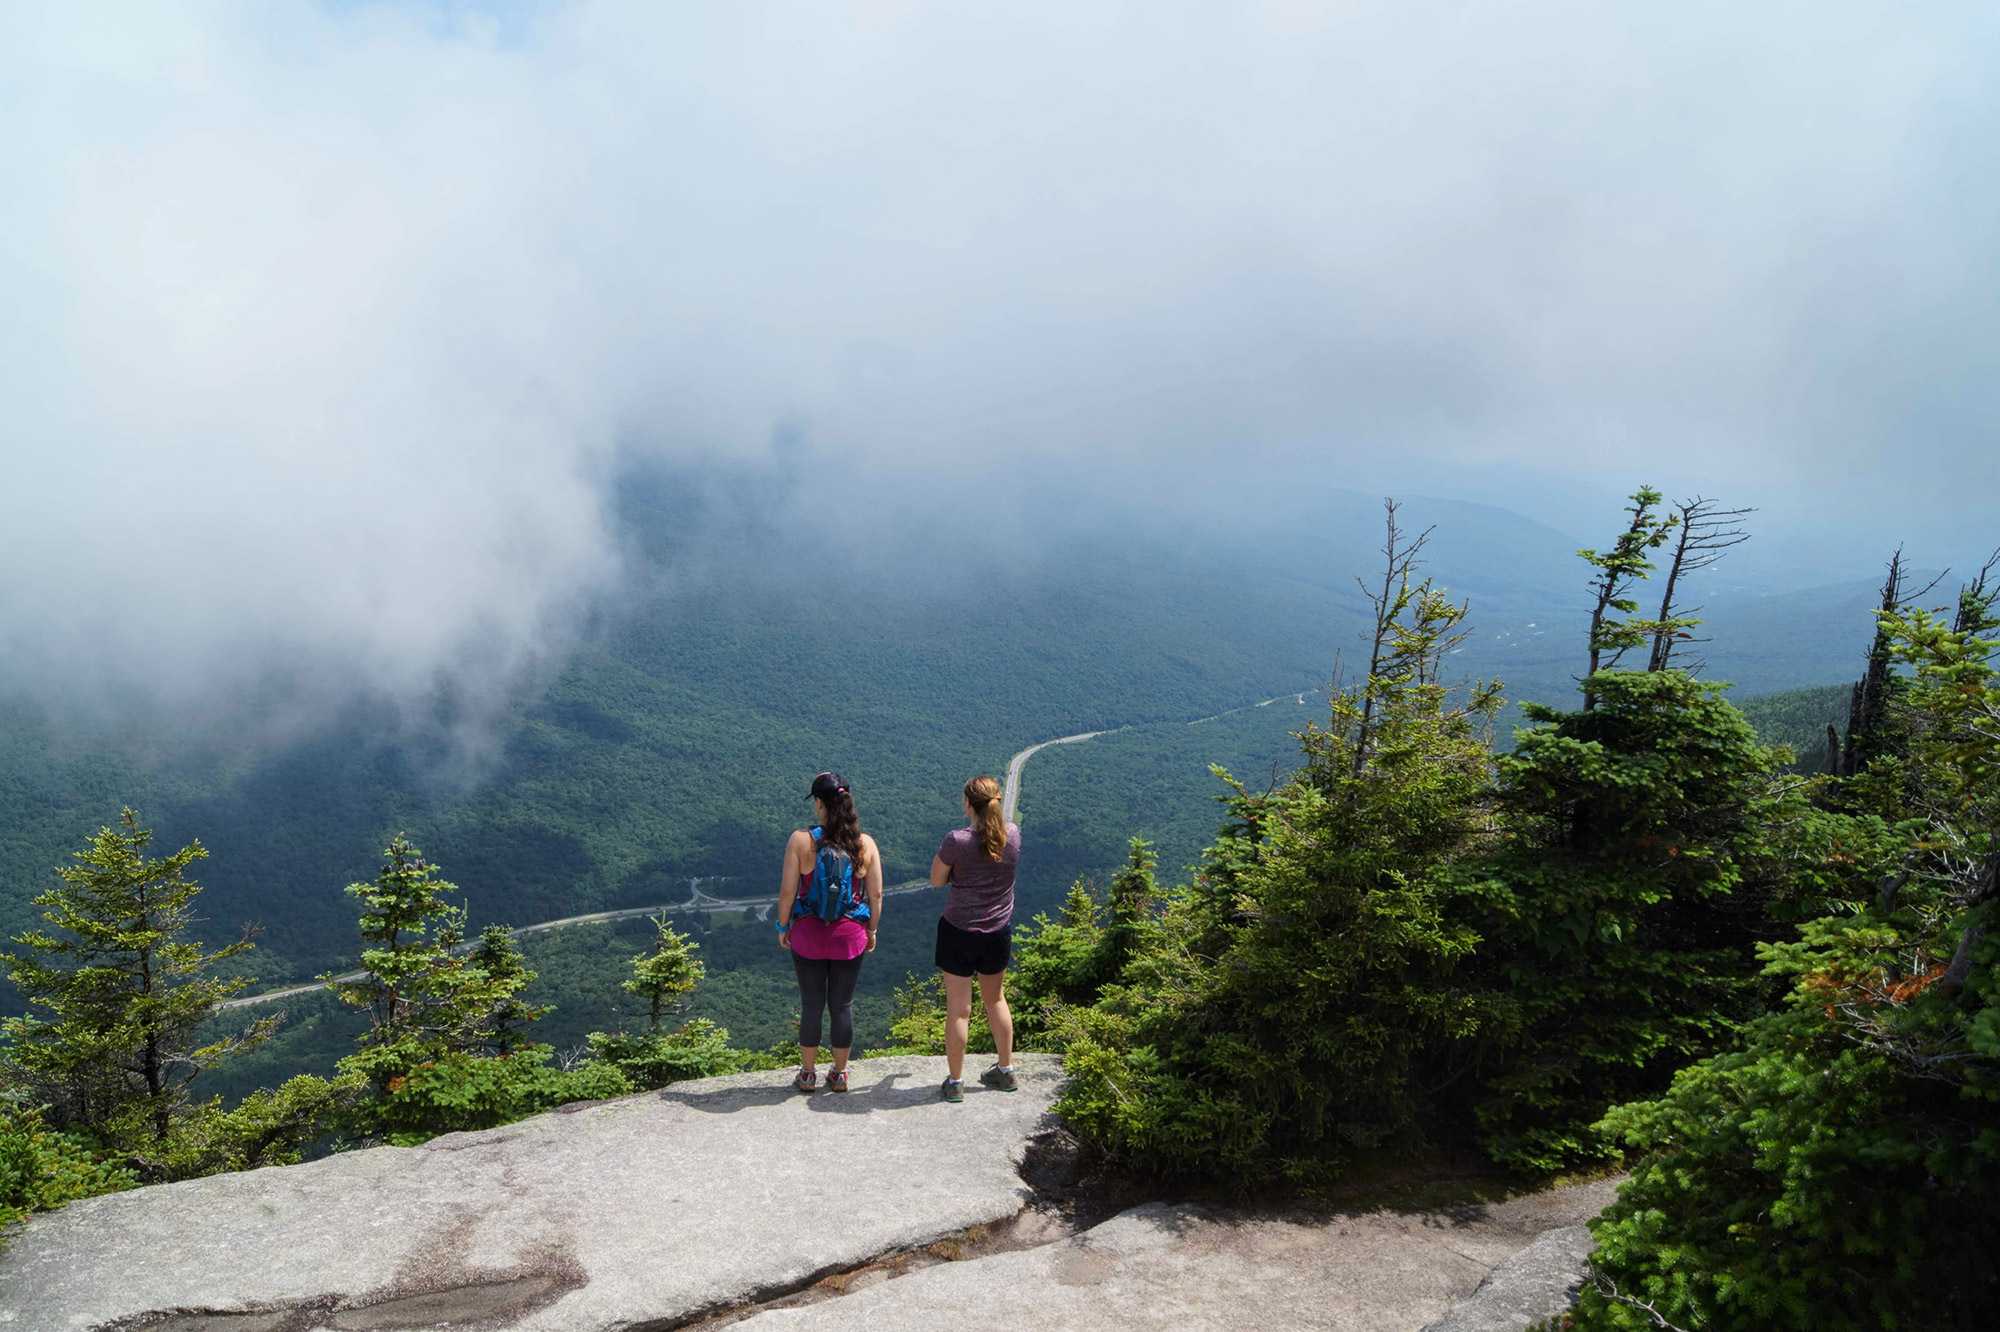 Bagging Peaks and Avoiding Packed Parking Lots in Franconia Notch